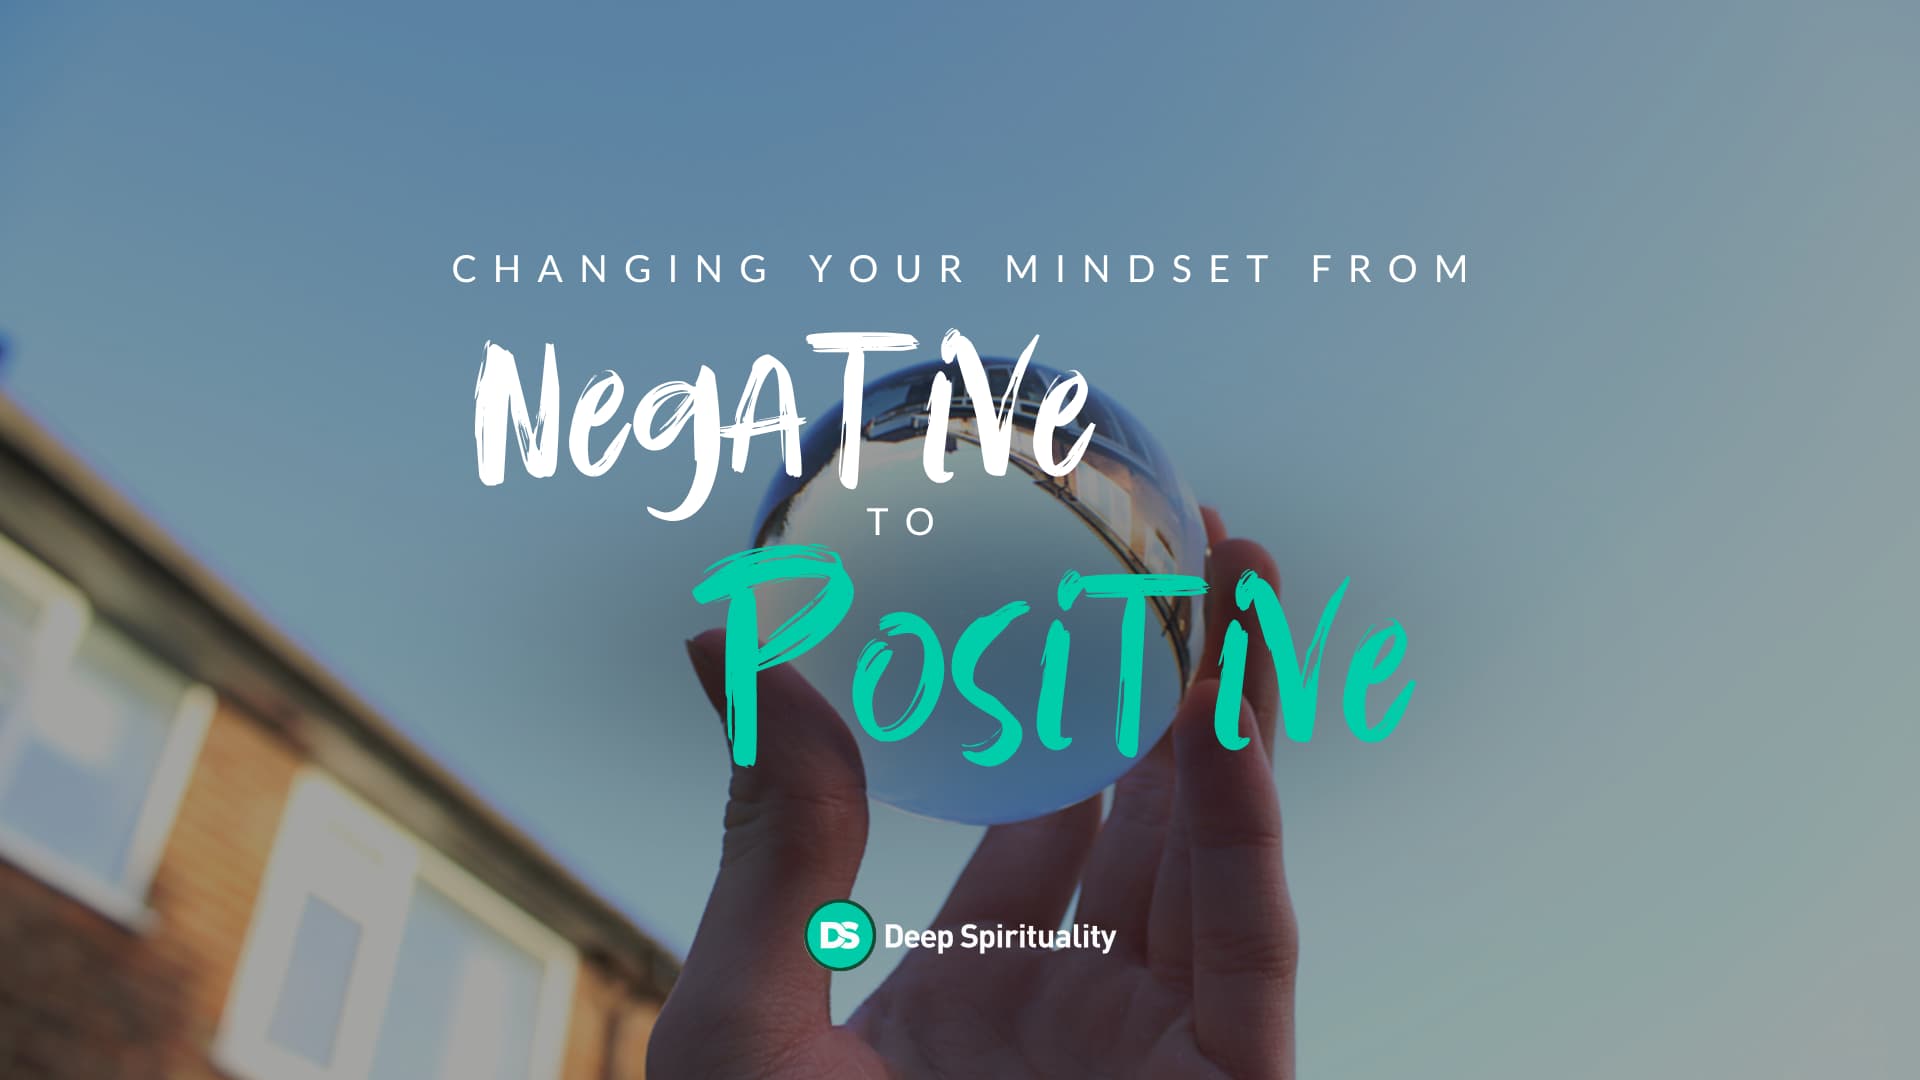 Changing Your Mindset From Negative to Positive  4